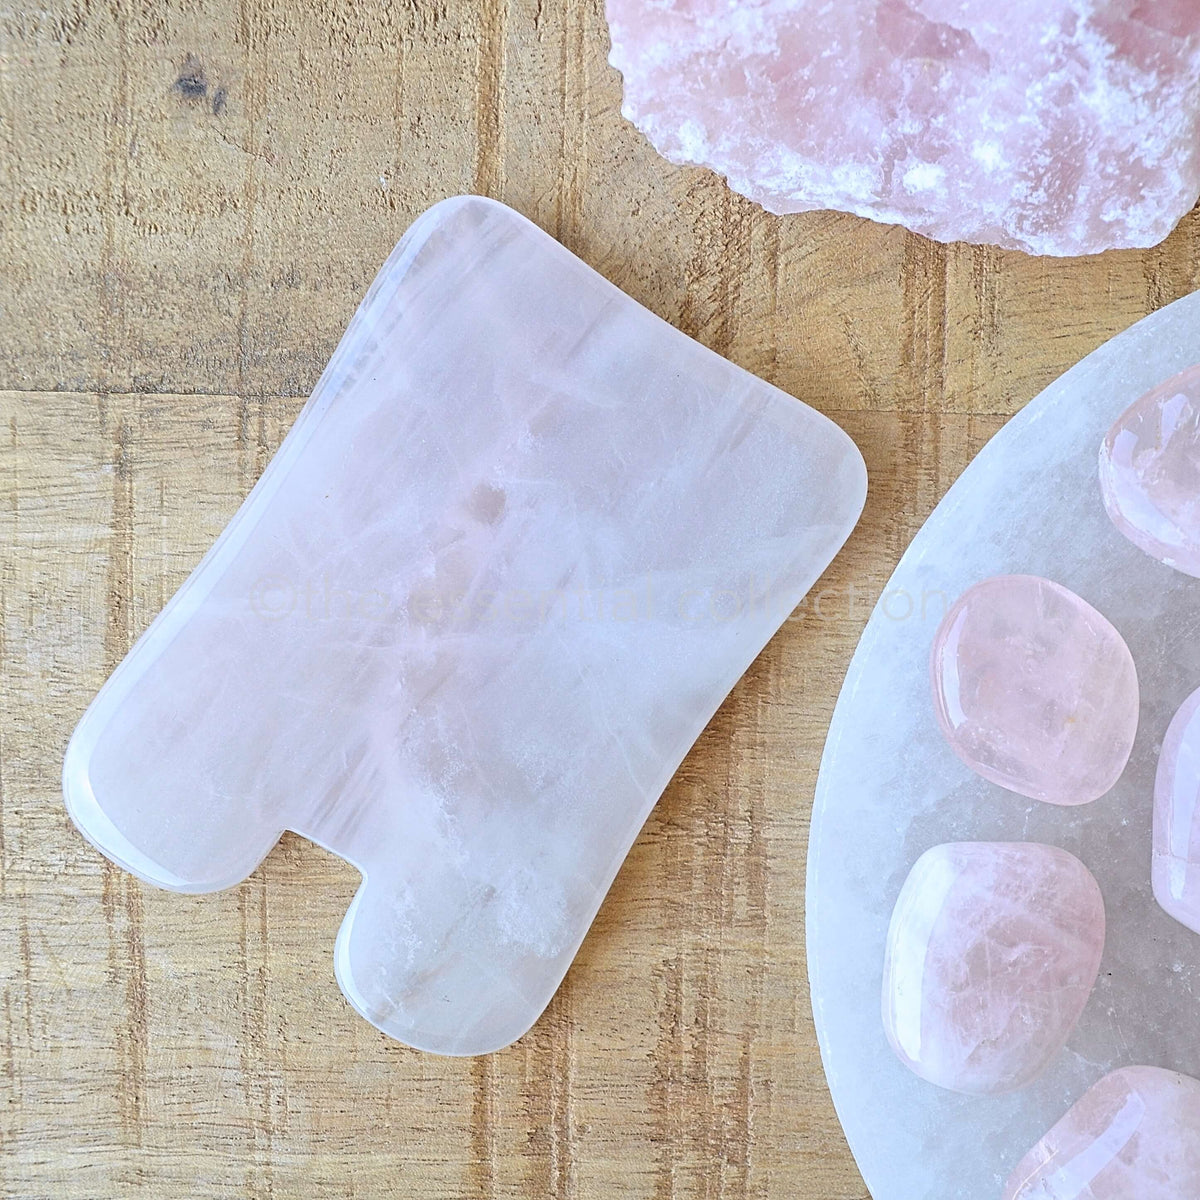 N shaped rose quartz Gua Sha crystals facial beauty tool sold by The Essential Collection Australia